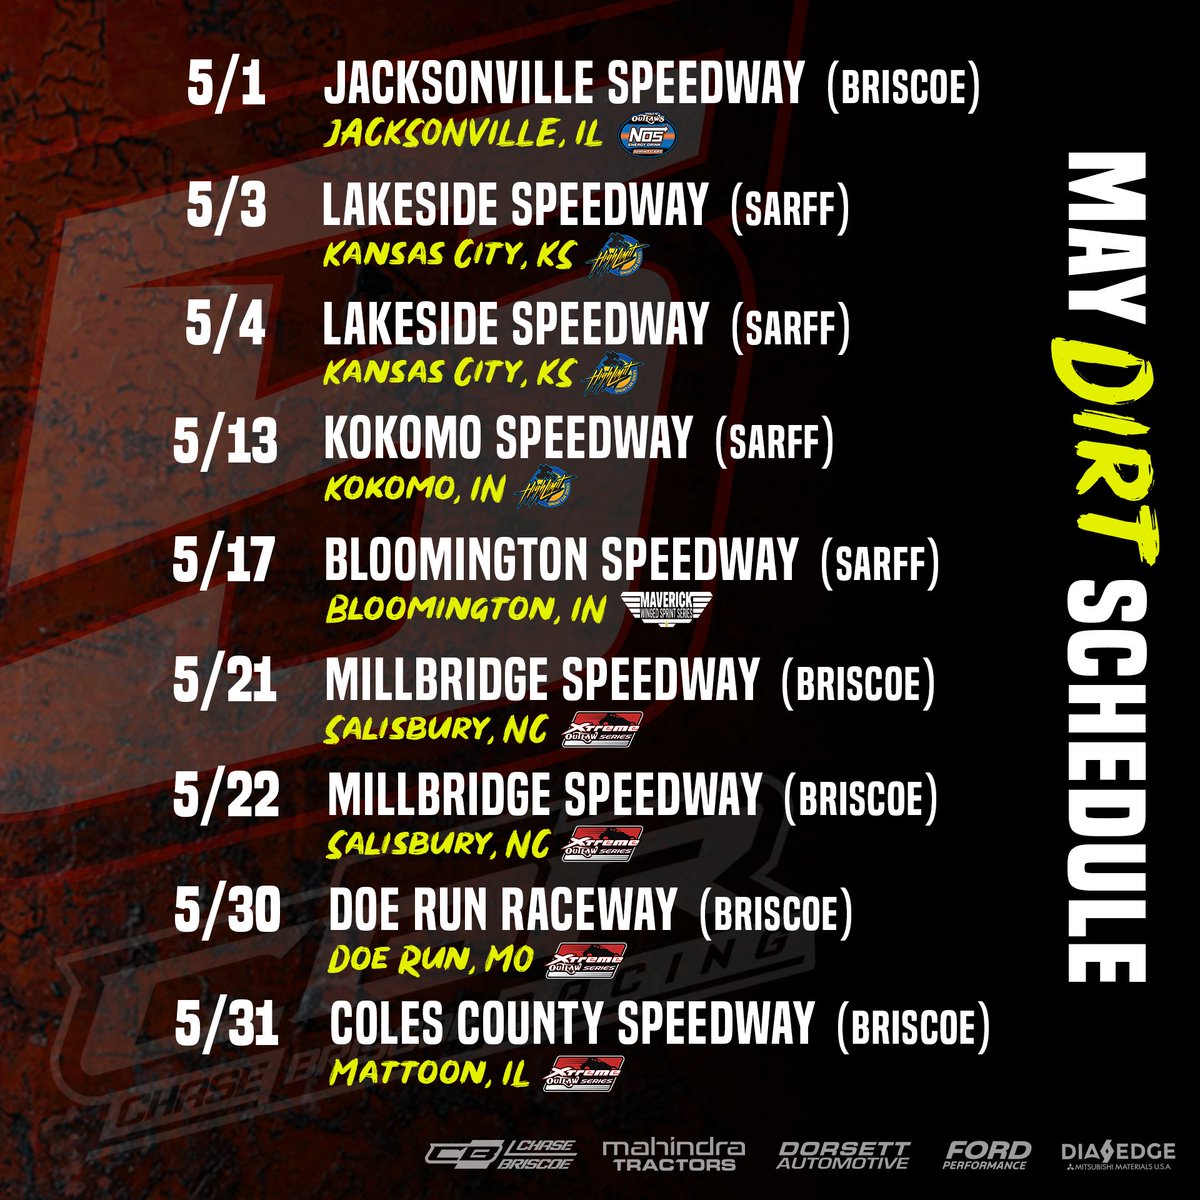 May dirt schedule 👇 kicking it off with the @WorldofOutlaws at @jaxspeedway next week. Come check it out!